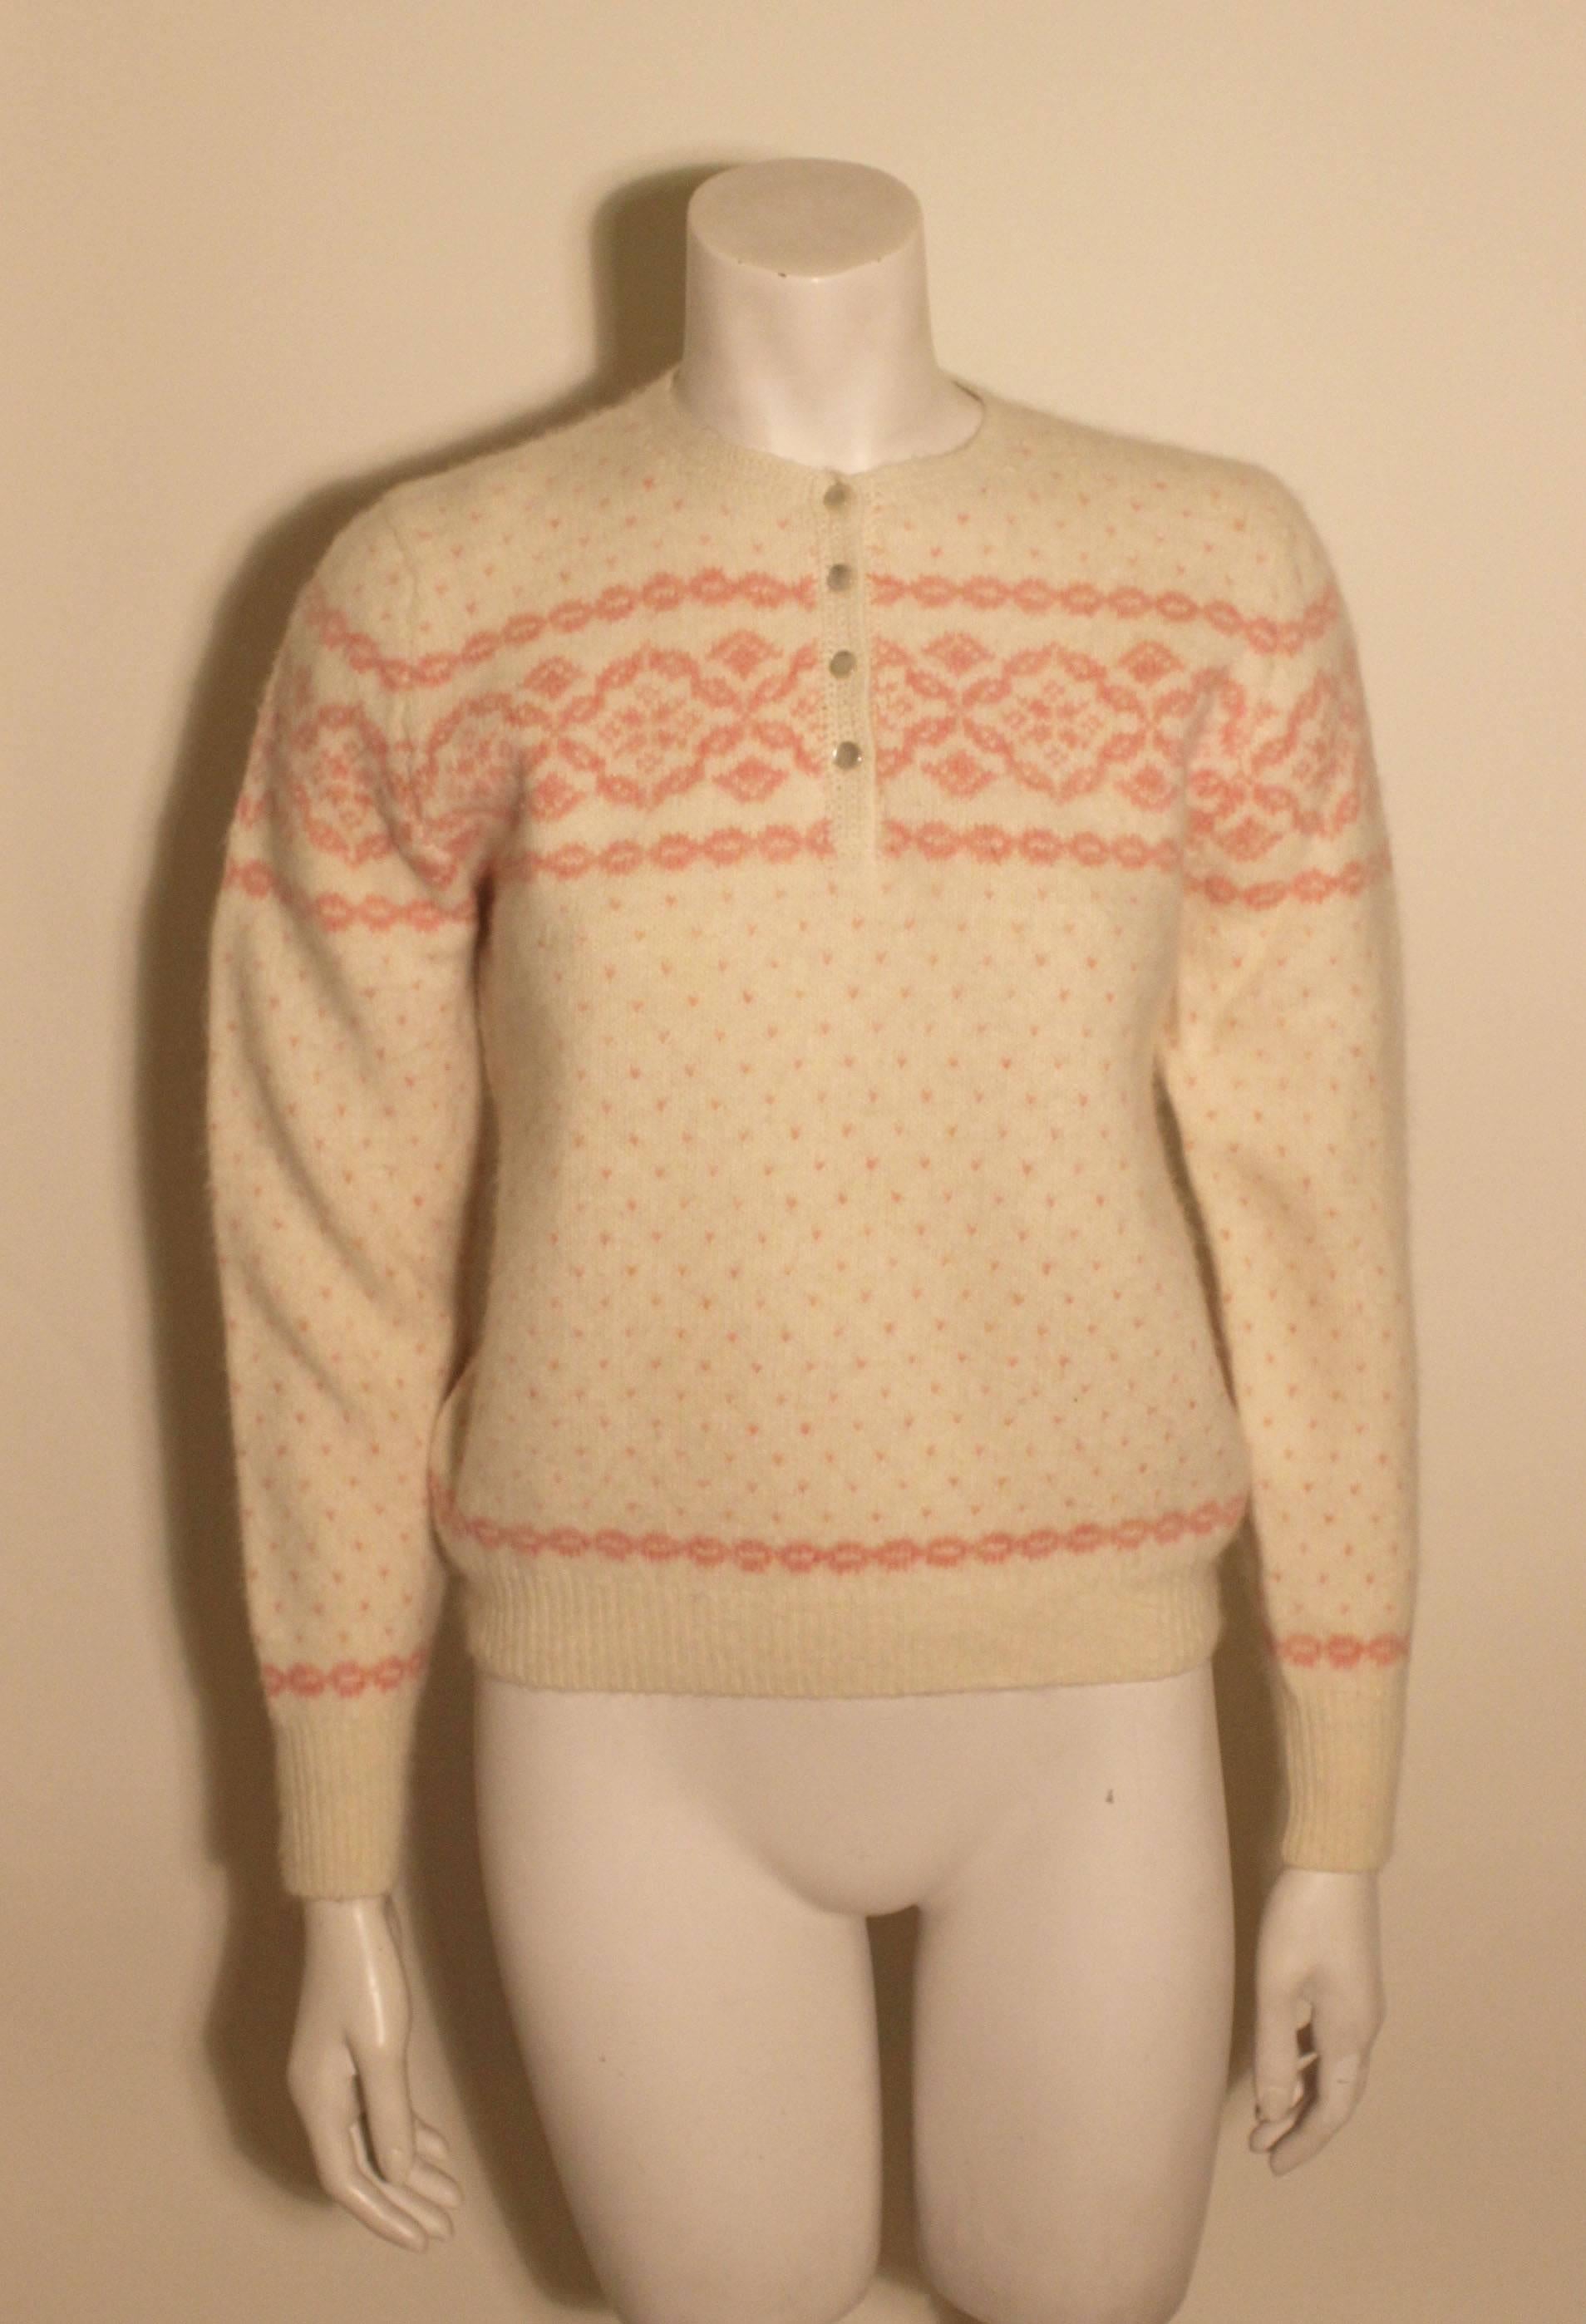 This Fair Isle sweater is from Deans of Scotland, known for their fine knits. The cut is classic with four buttons at the front with a lovely pink design on the light creme colored wool.